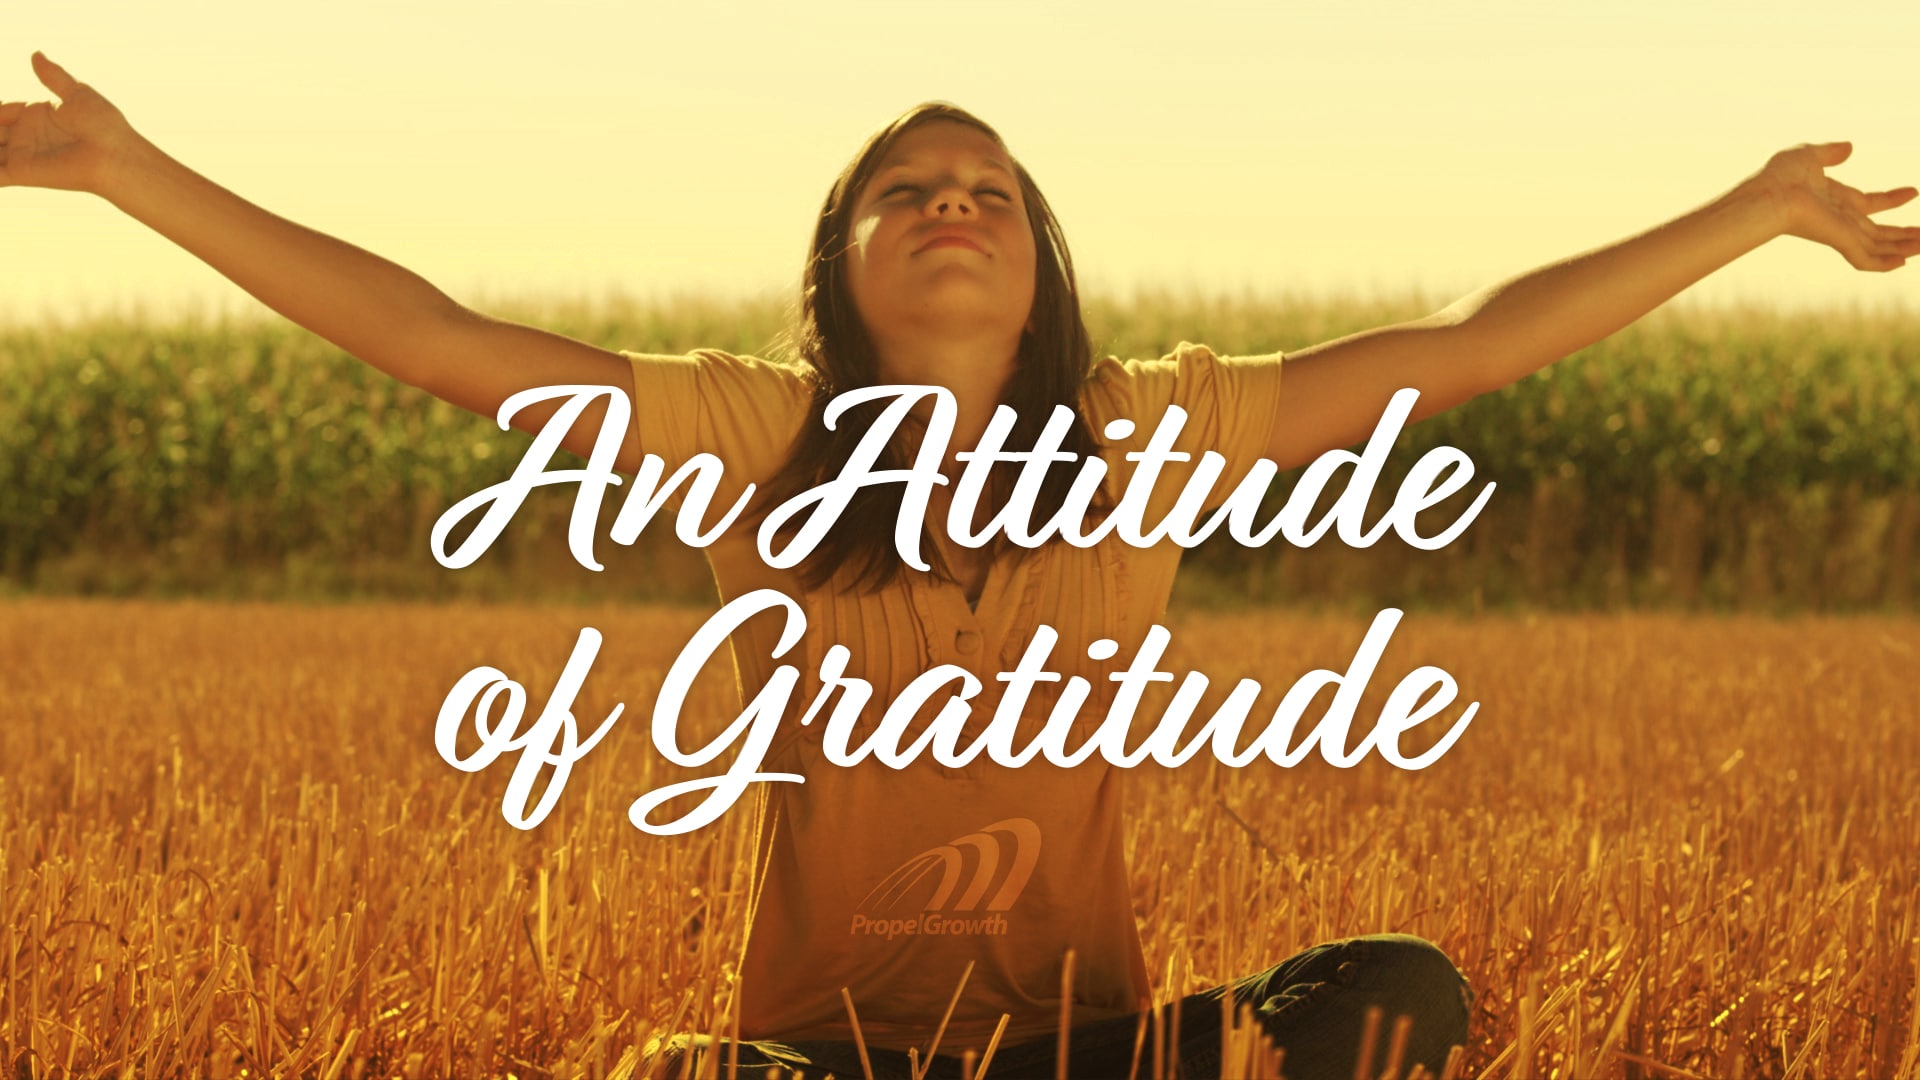 For 2020, Let's Cultivate an Attitude of Gratitude - PropelGrowth